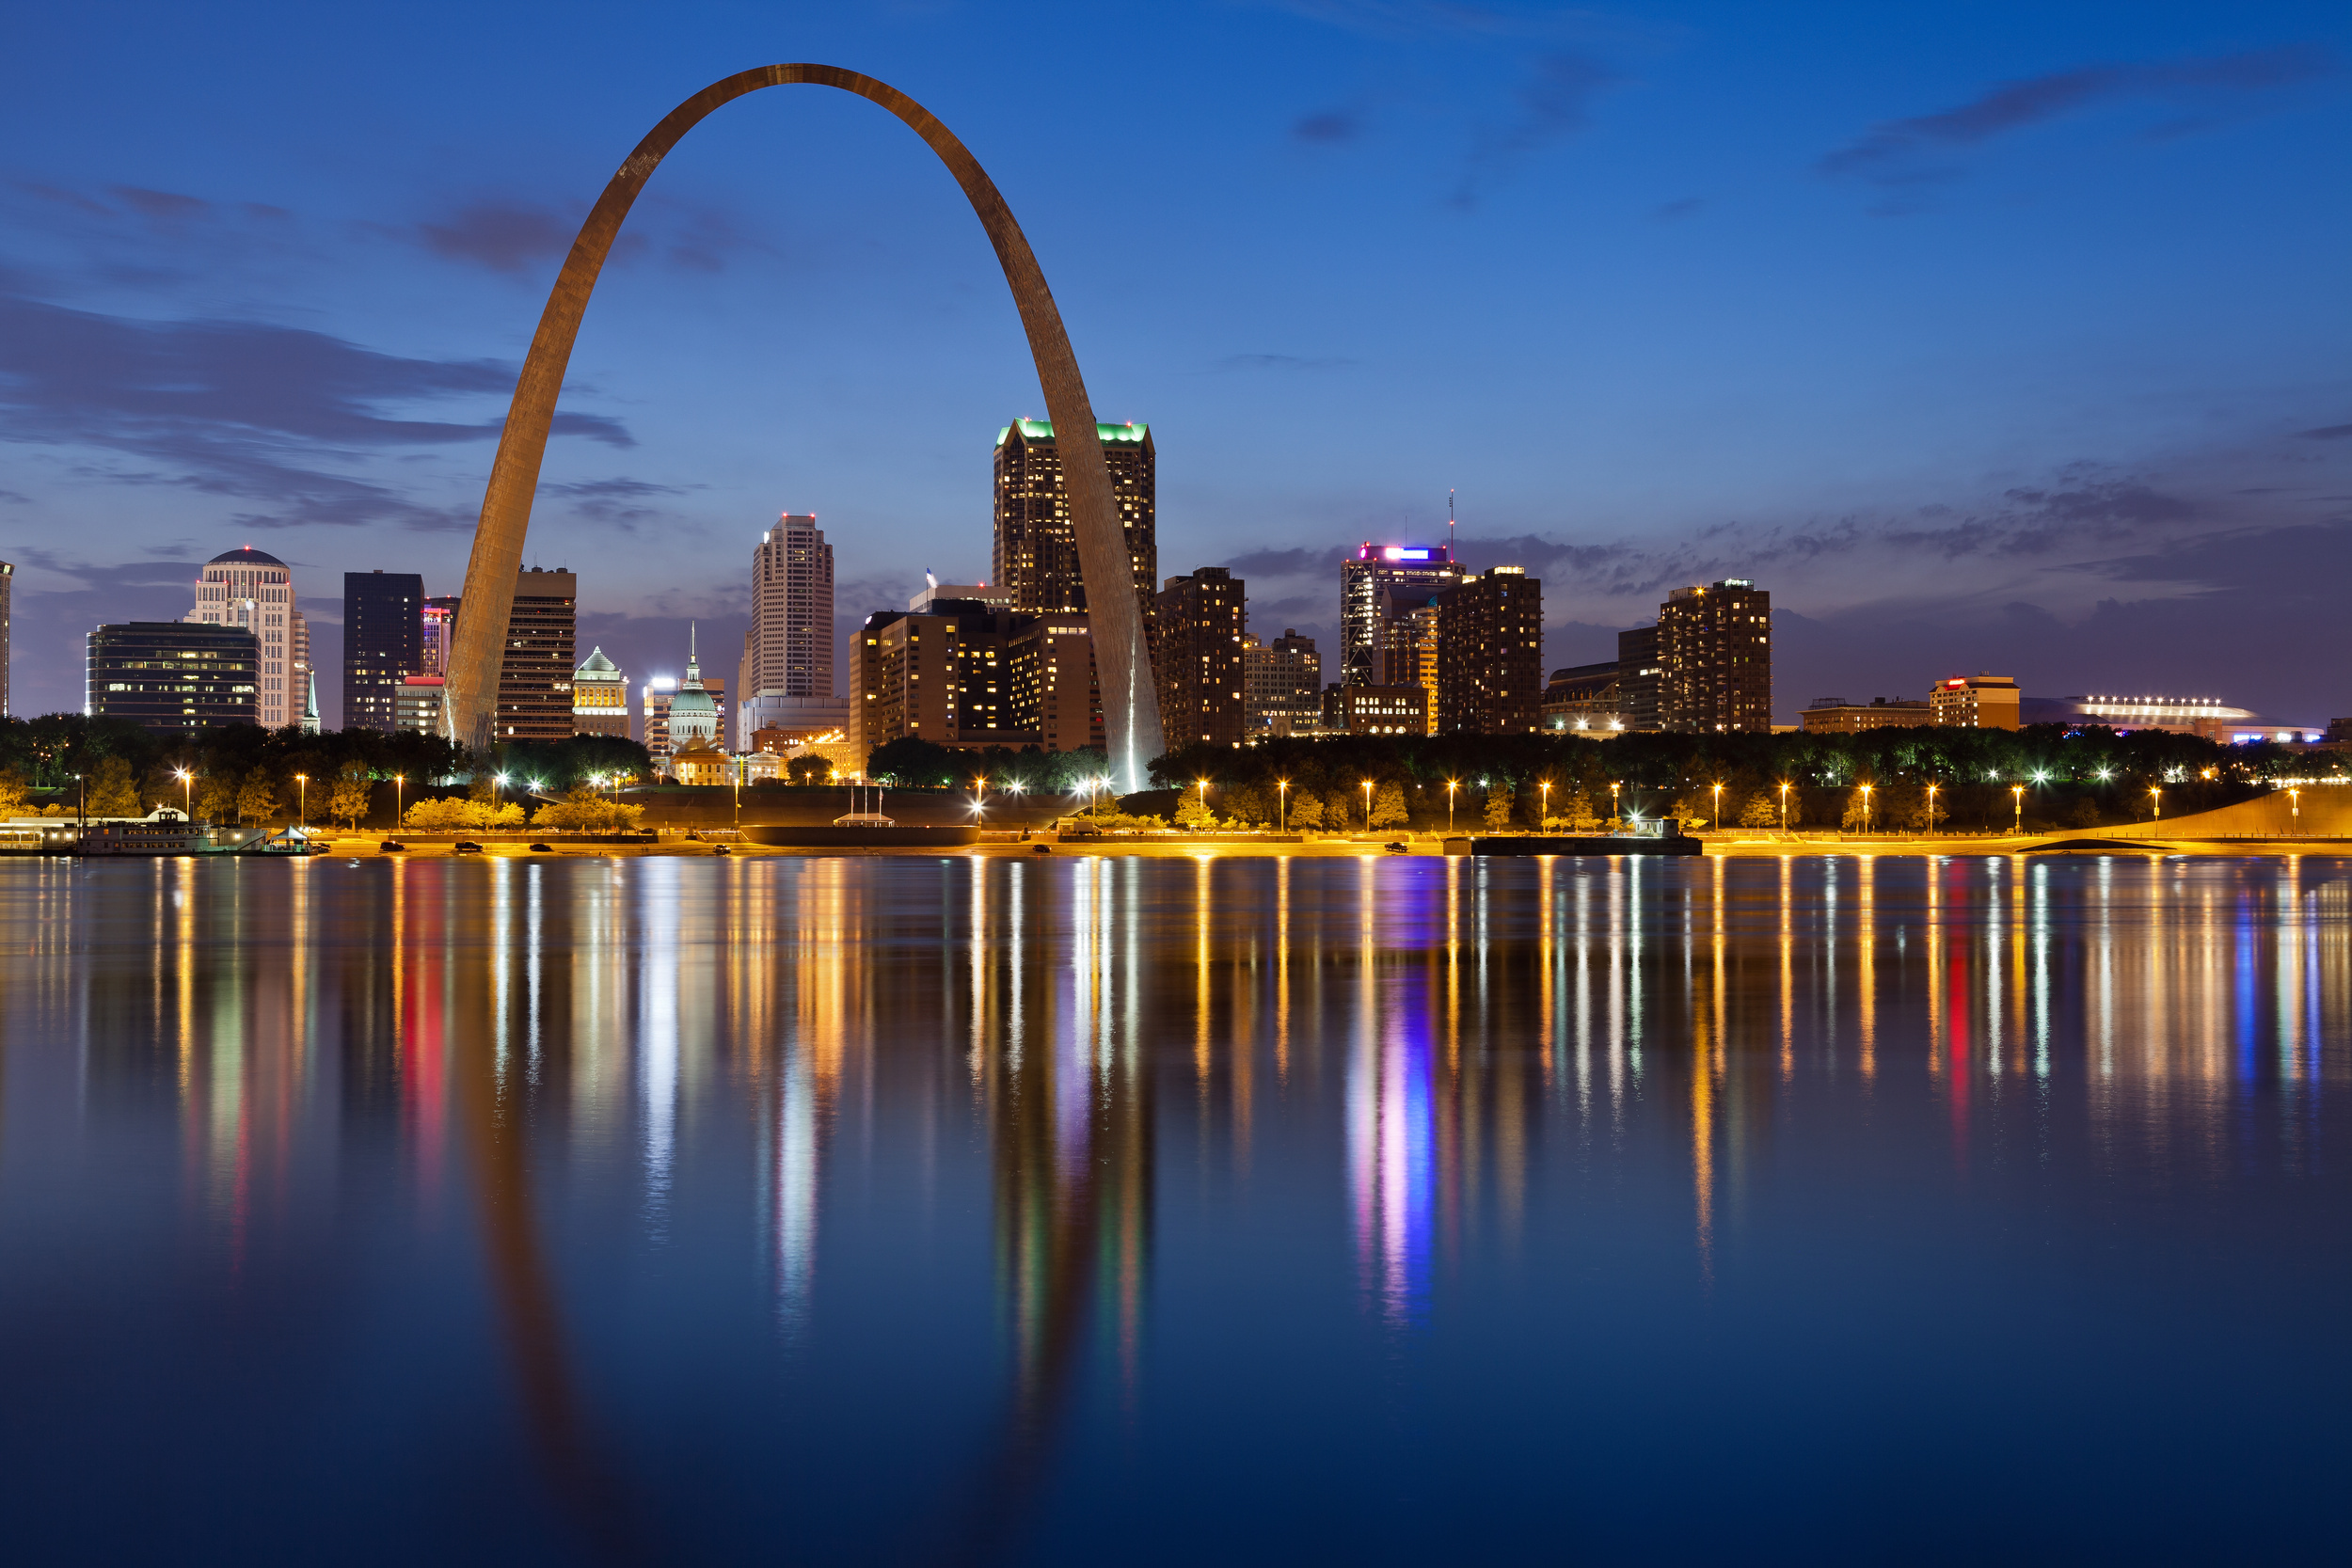 <p>There's a great music scene in St. Louis. It's easy to find live jazz whenever you're in the mood, and many bars offer karaoke, too. There are also the stereotypical bar offerings across the city, each playing their part to ensure locals and visitors that there’s always something to do. </p><p><a href='https://www.msn.com/en-us/community/channel/vid-cj9pqbr0vn9in2b6ddcd8sfgpfq6x6utp44fssrv6mc2gtybw0us'>Follow us on MSN to see more of our exclusive lifestyle content.</a></p>